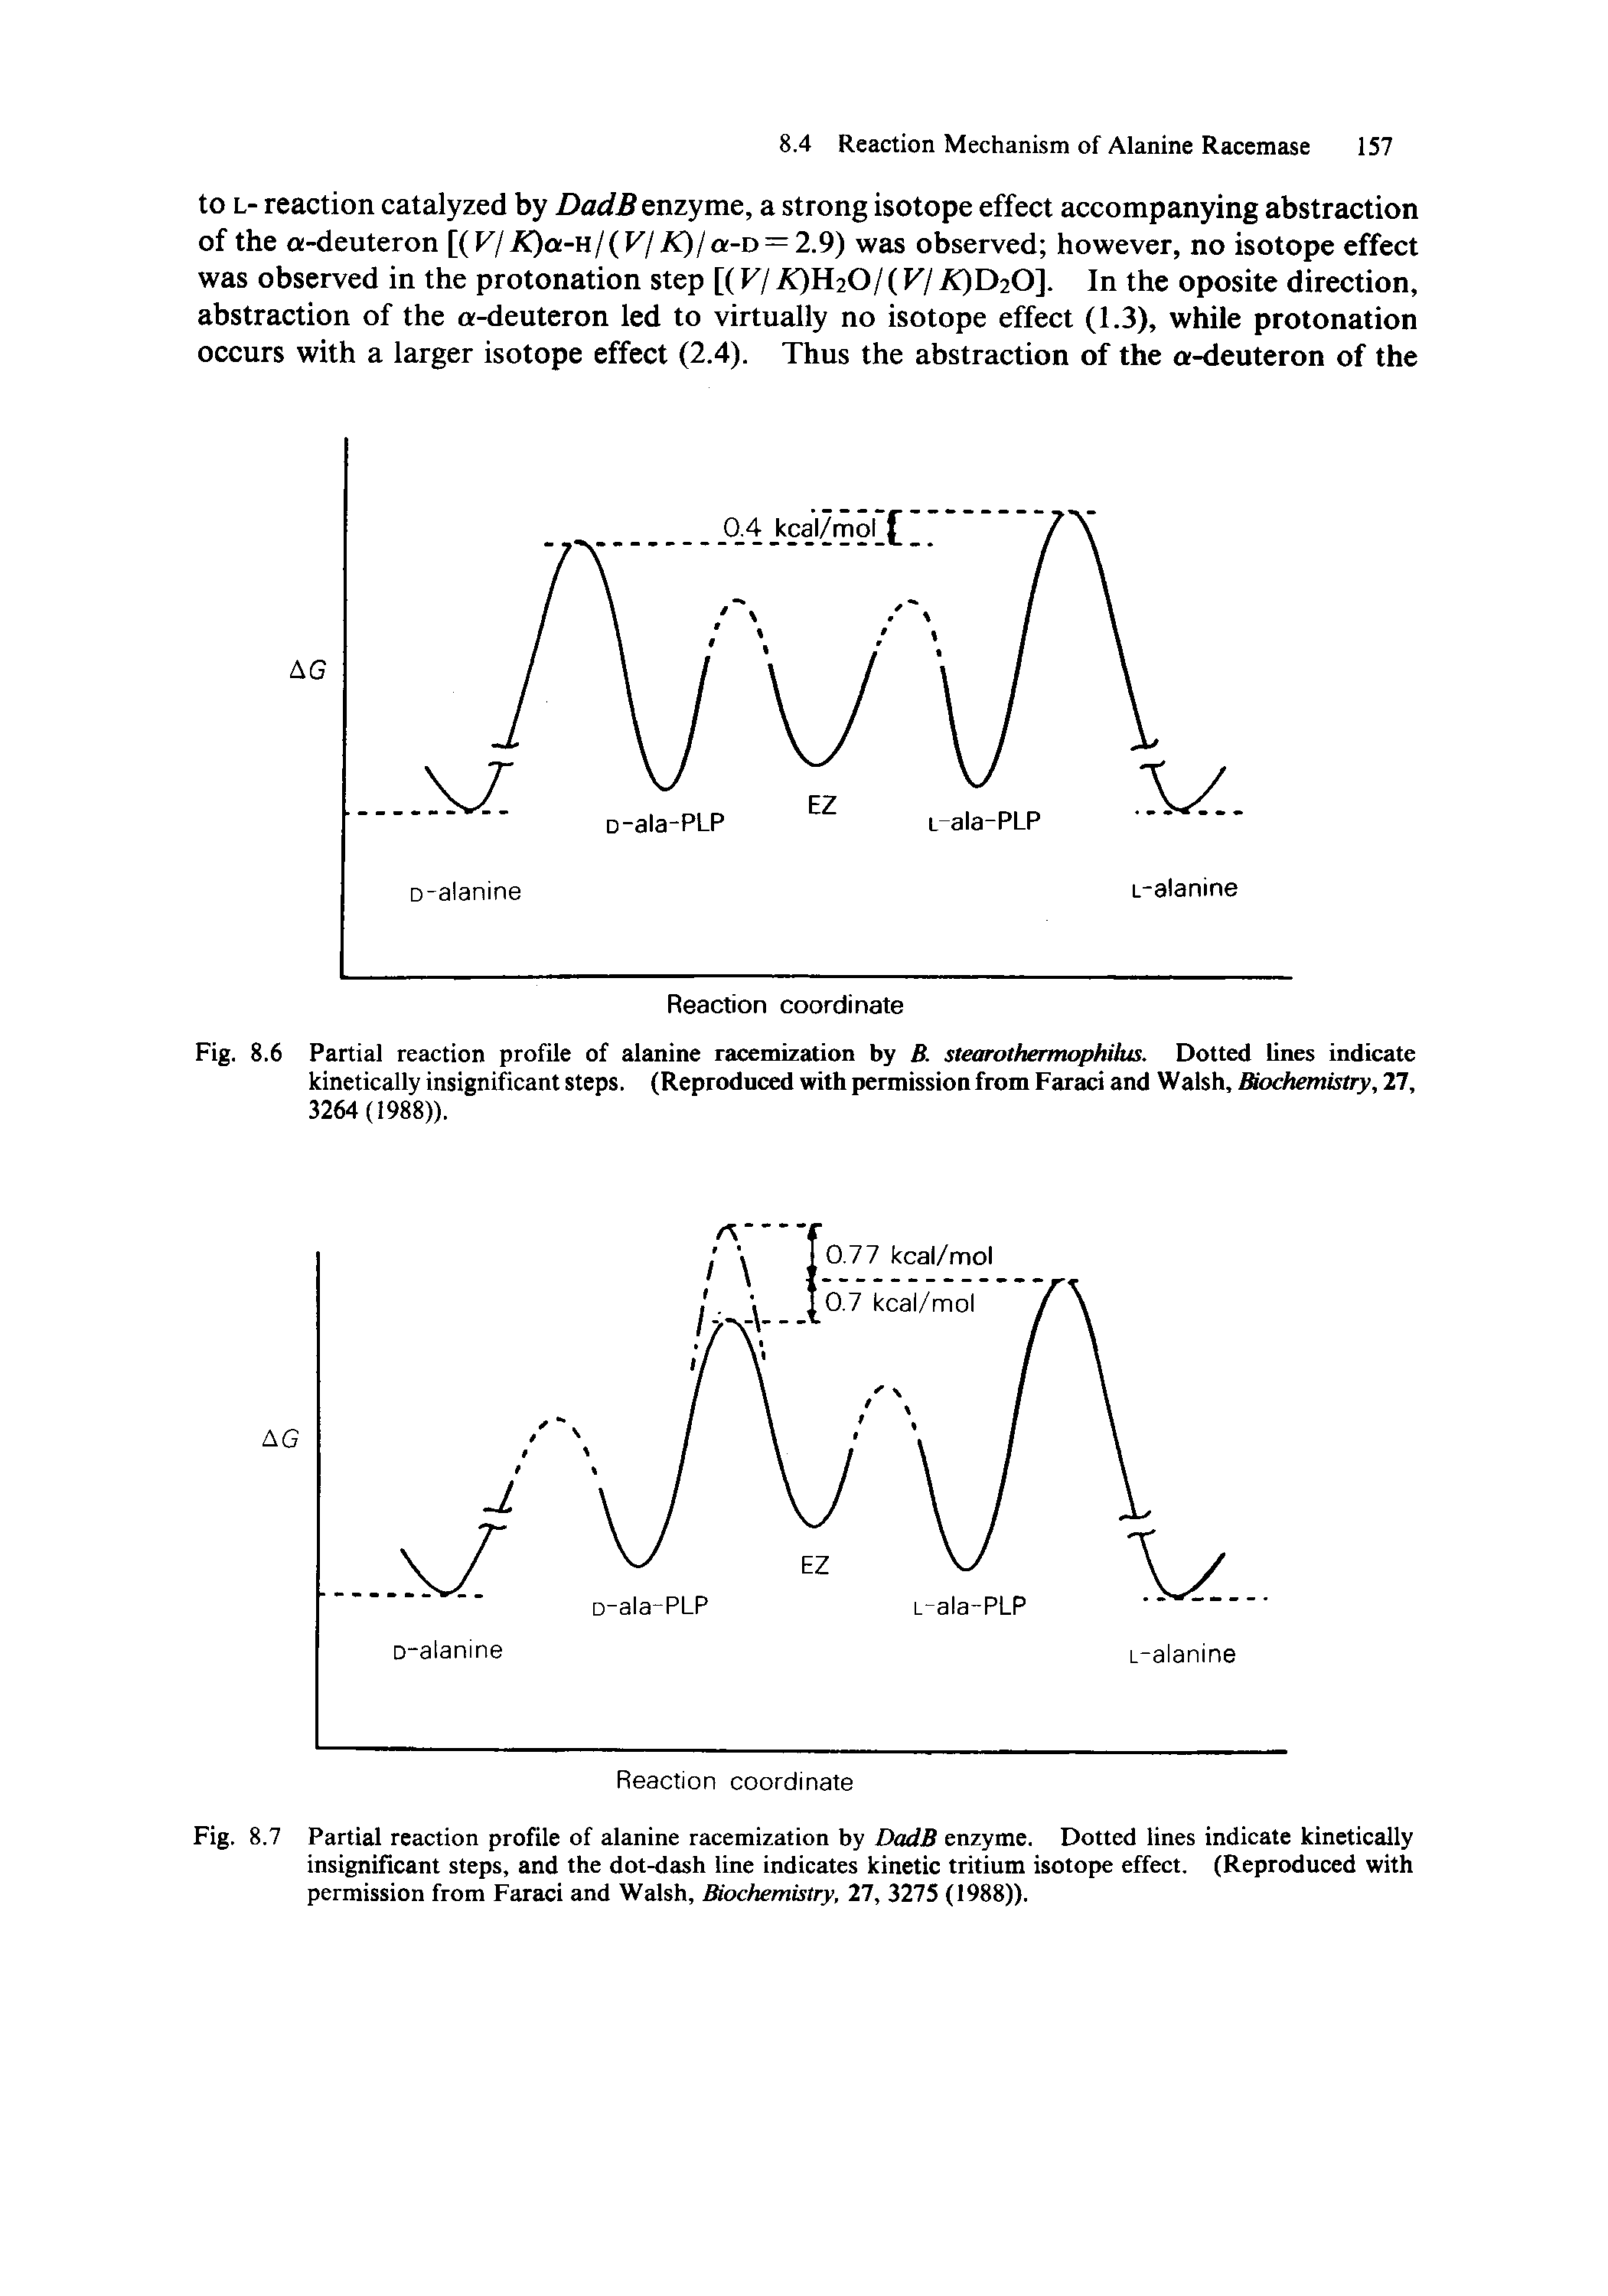 Fig. 8.7 Partial reaction profile of alanine racemization by DadB enzyme. Dotted lines indicate kinetically insignificant steps, and the dot-dash line indicates kinetic tritium isotope effect. (Reproduced with permission from Faraci and Walsh, Biochemistry, 27, 3275 (1988)).